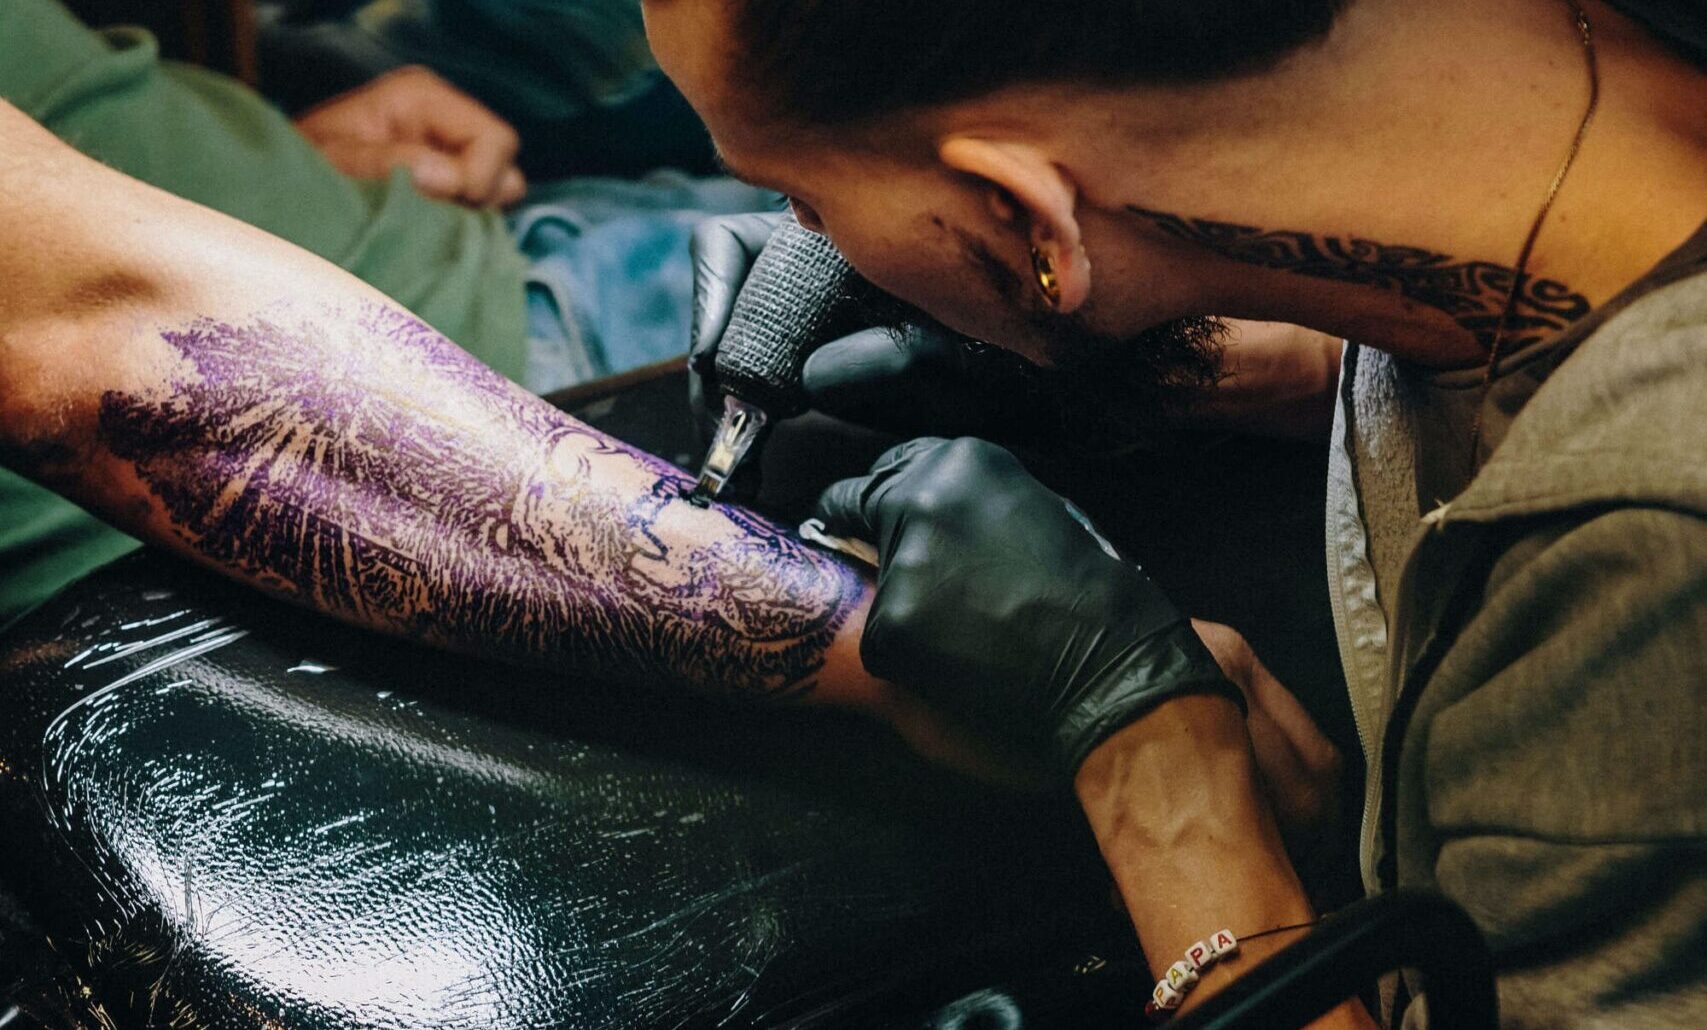 How to become a tattoo artist - A tattoo artist tattooing the underarm of a man.